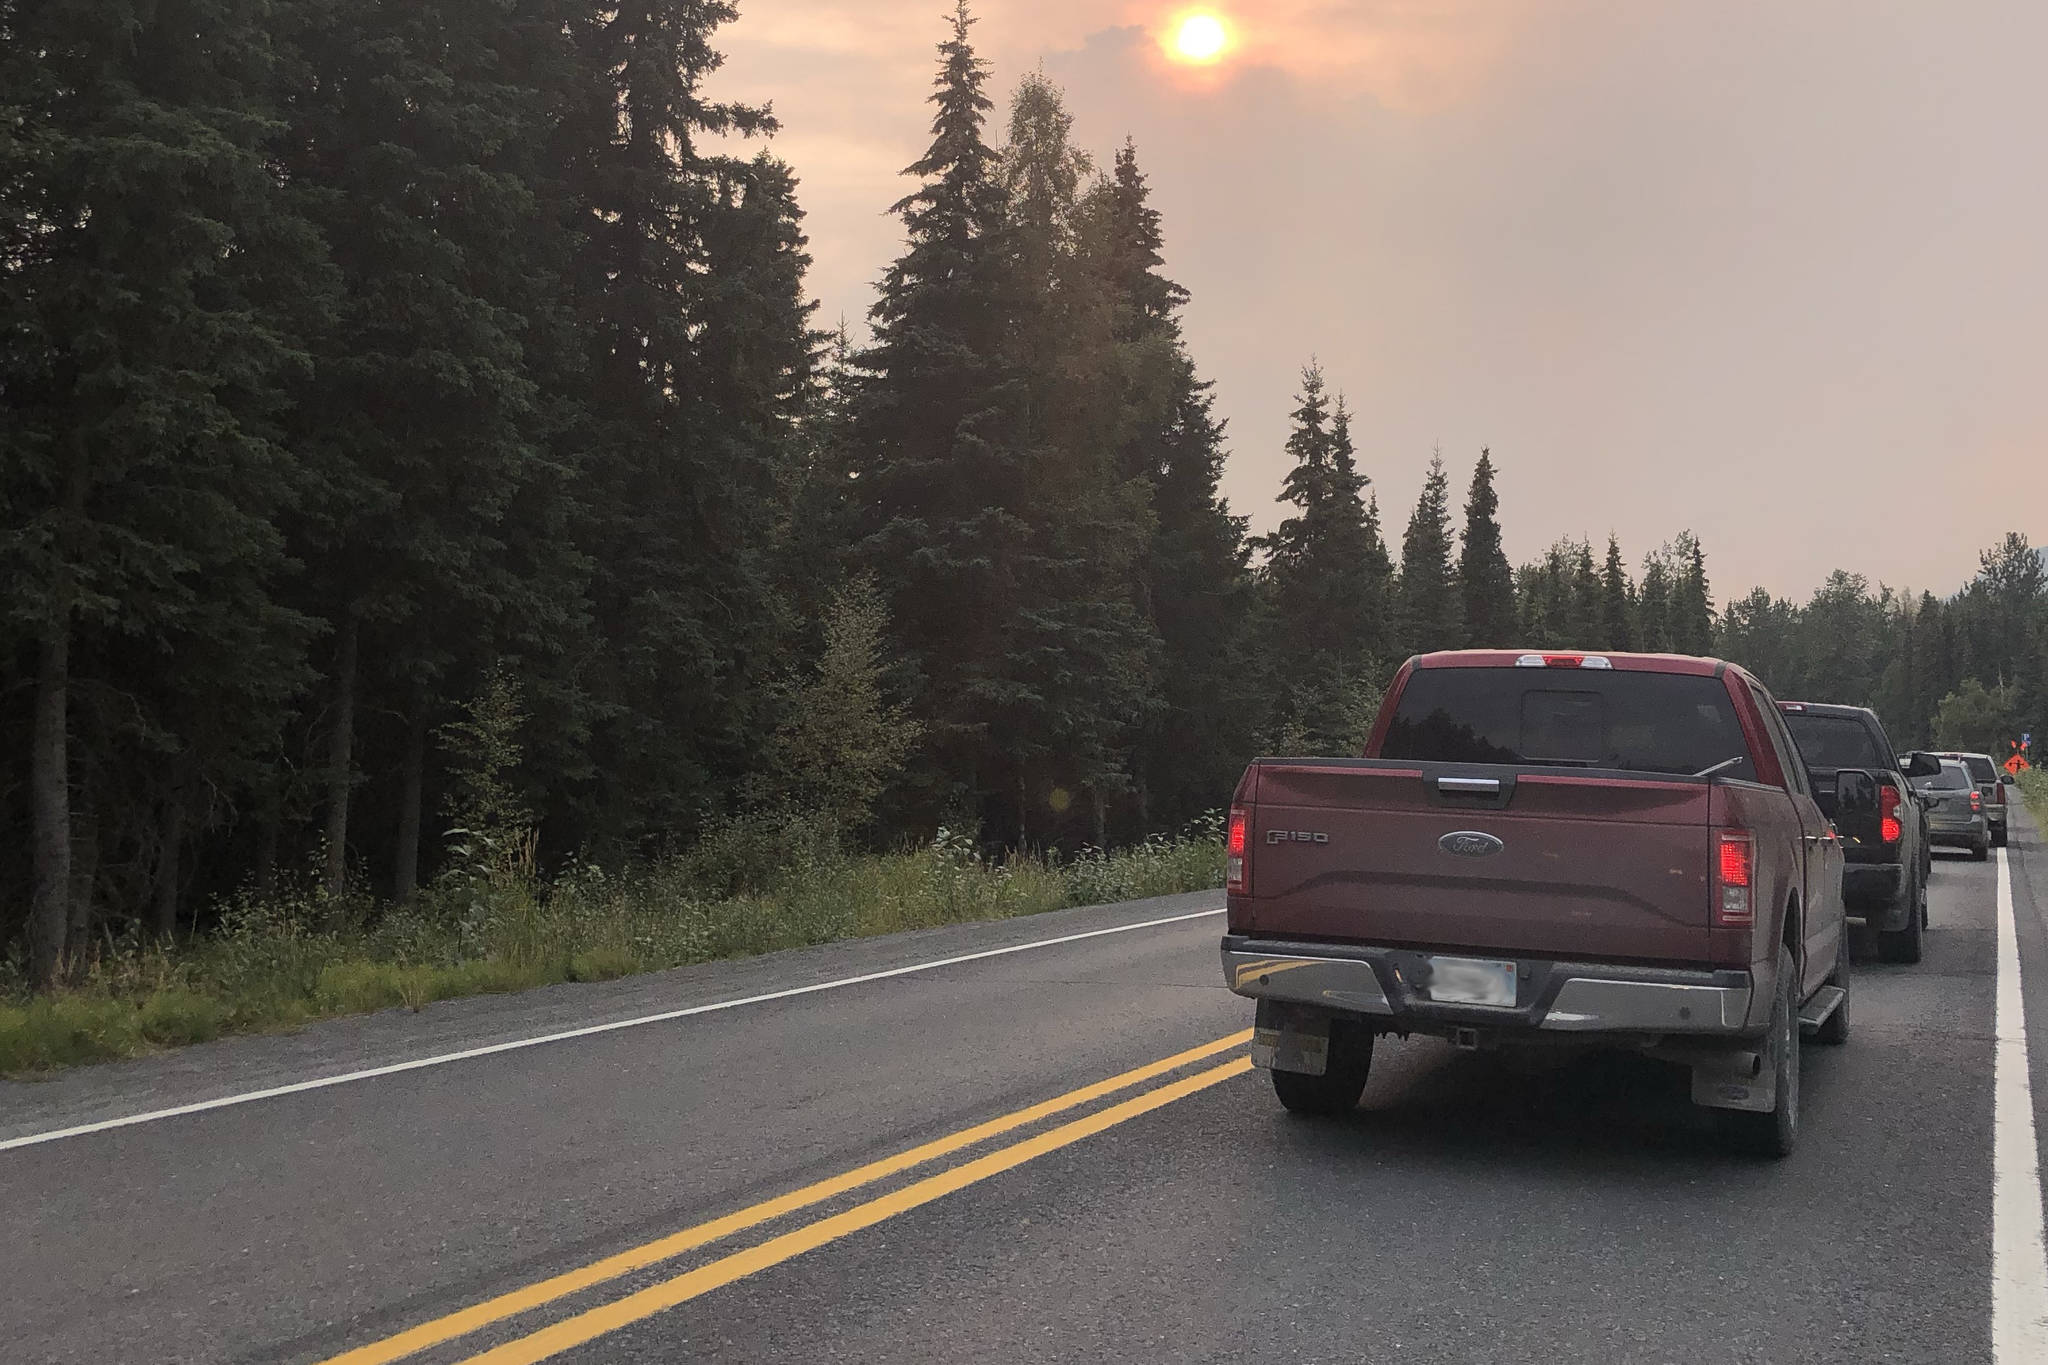 Traffic is backed up along the Sterling Highway after the proximity of the Swan Lake Fire caused a road closure on Aug. 19, 2019. (Photo by Victoria Petersen/Peninsula Clarion)